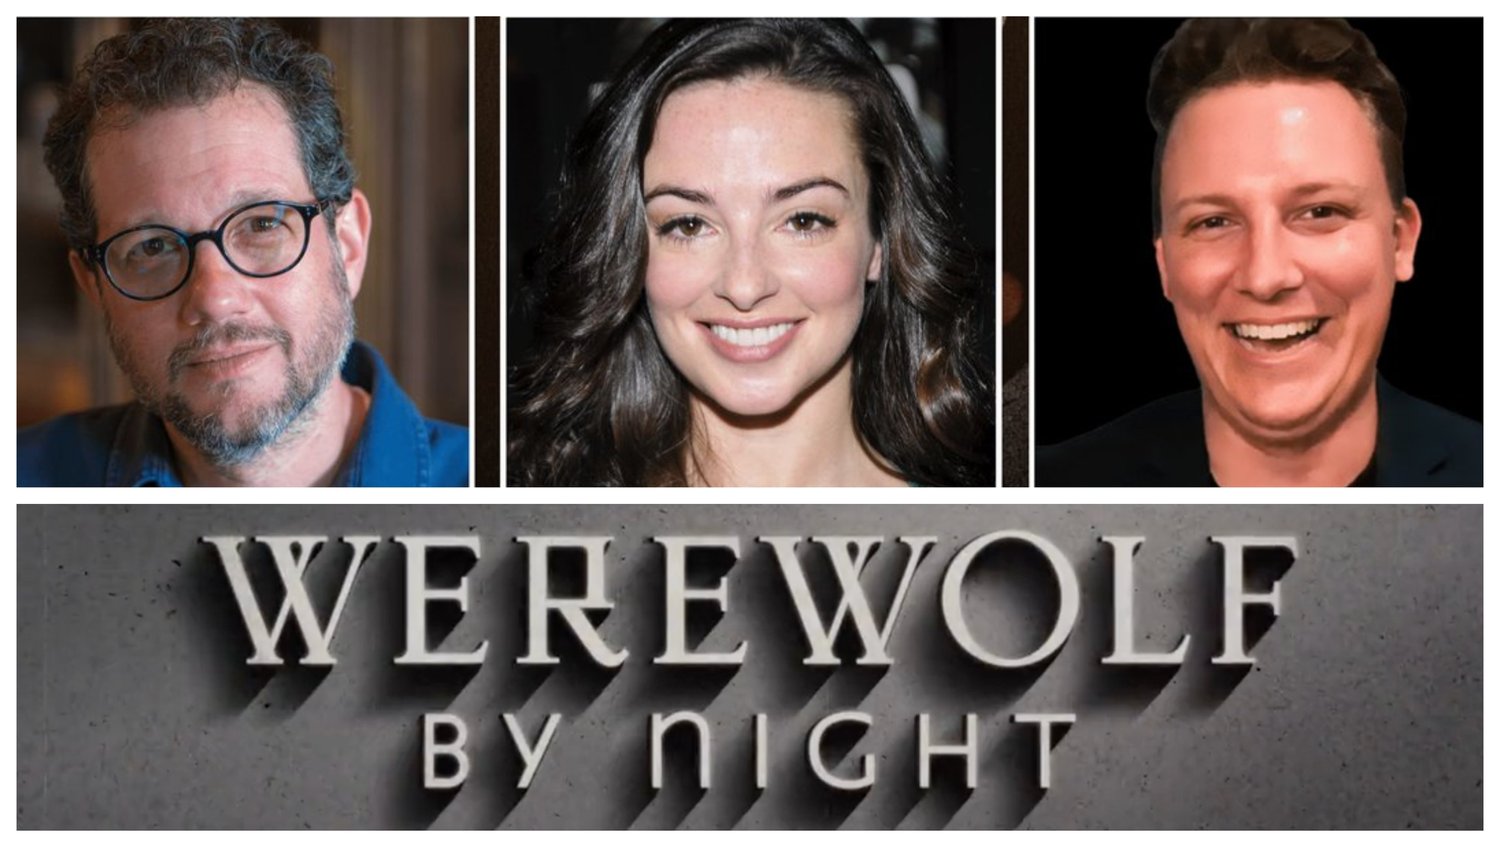 Exclusive: Director Michael Giacchino, Laura Donnelly & Co-Executive  Producer Brian Gay talk Werewolf By Night —